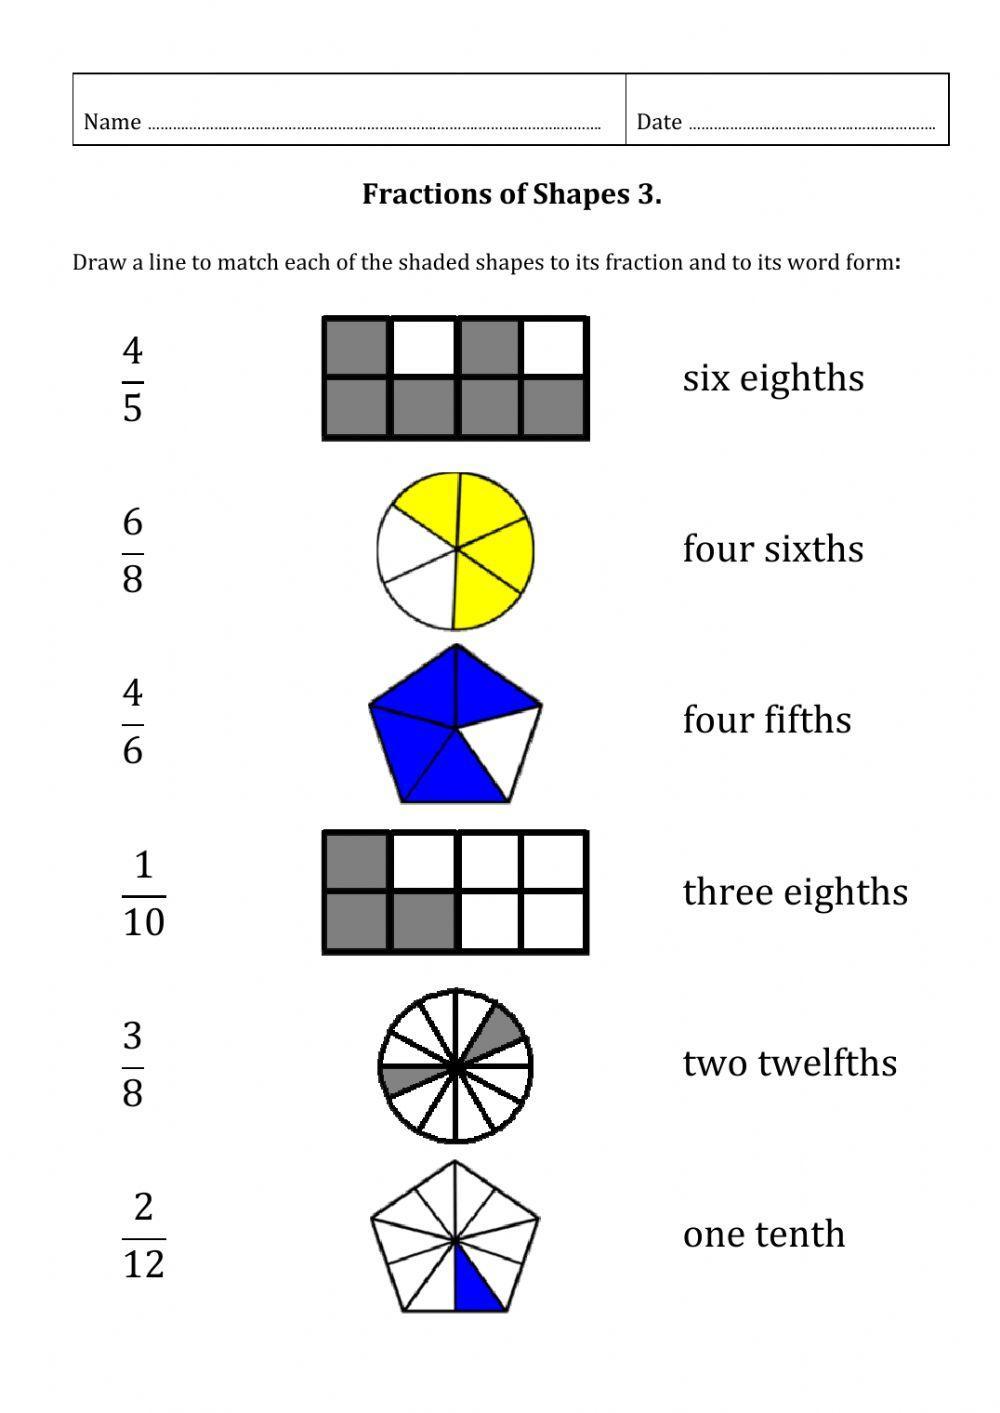 Fractions of Shapes 3